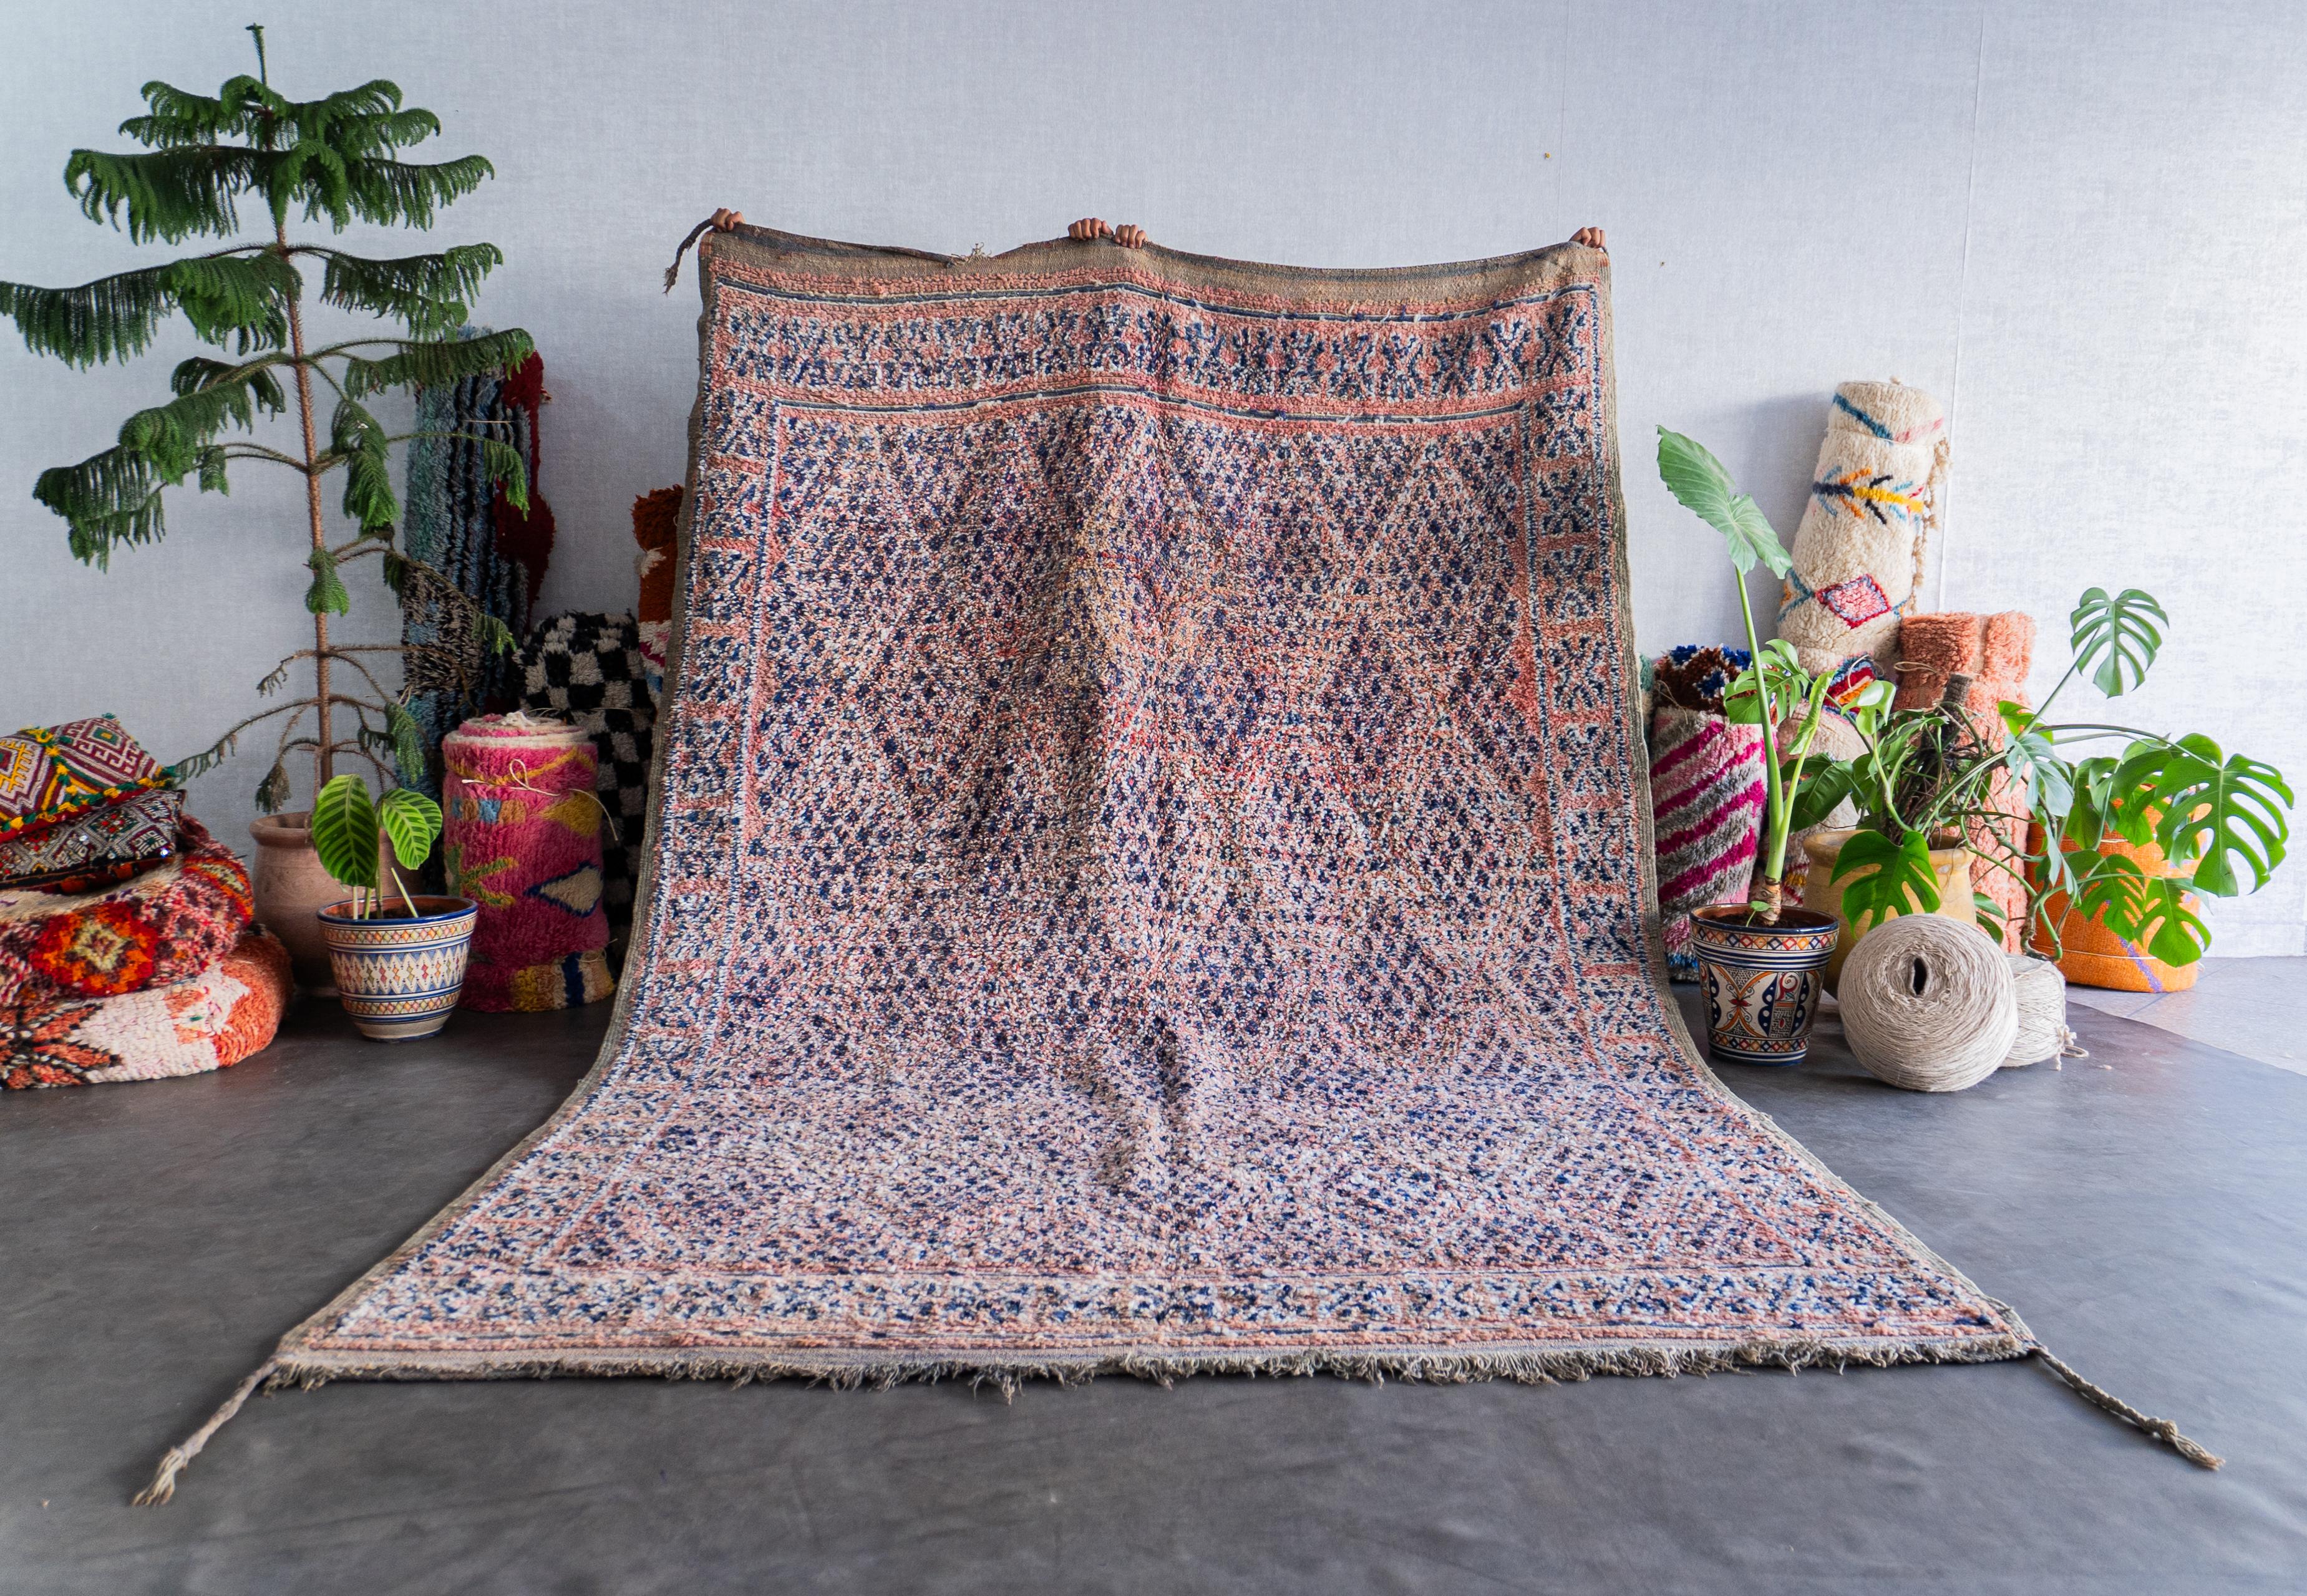 Uncover the rich heritage woven into our Moroccan vintage rug. Handmade by skilled artisans using time-tested techniques, each Berber rug is a unique narrative, echoing the cultural tapestry of Morocco. With intricate geometric patterns and a warm